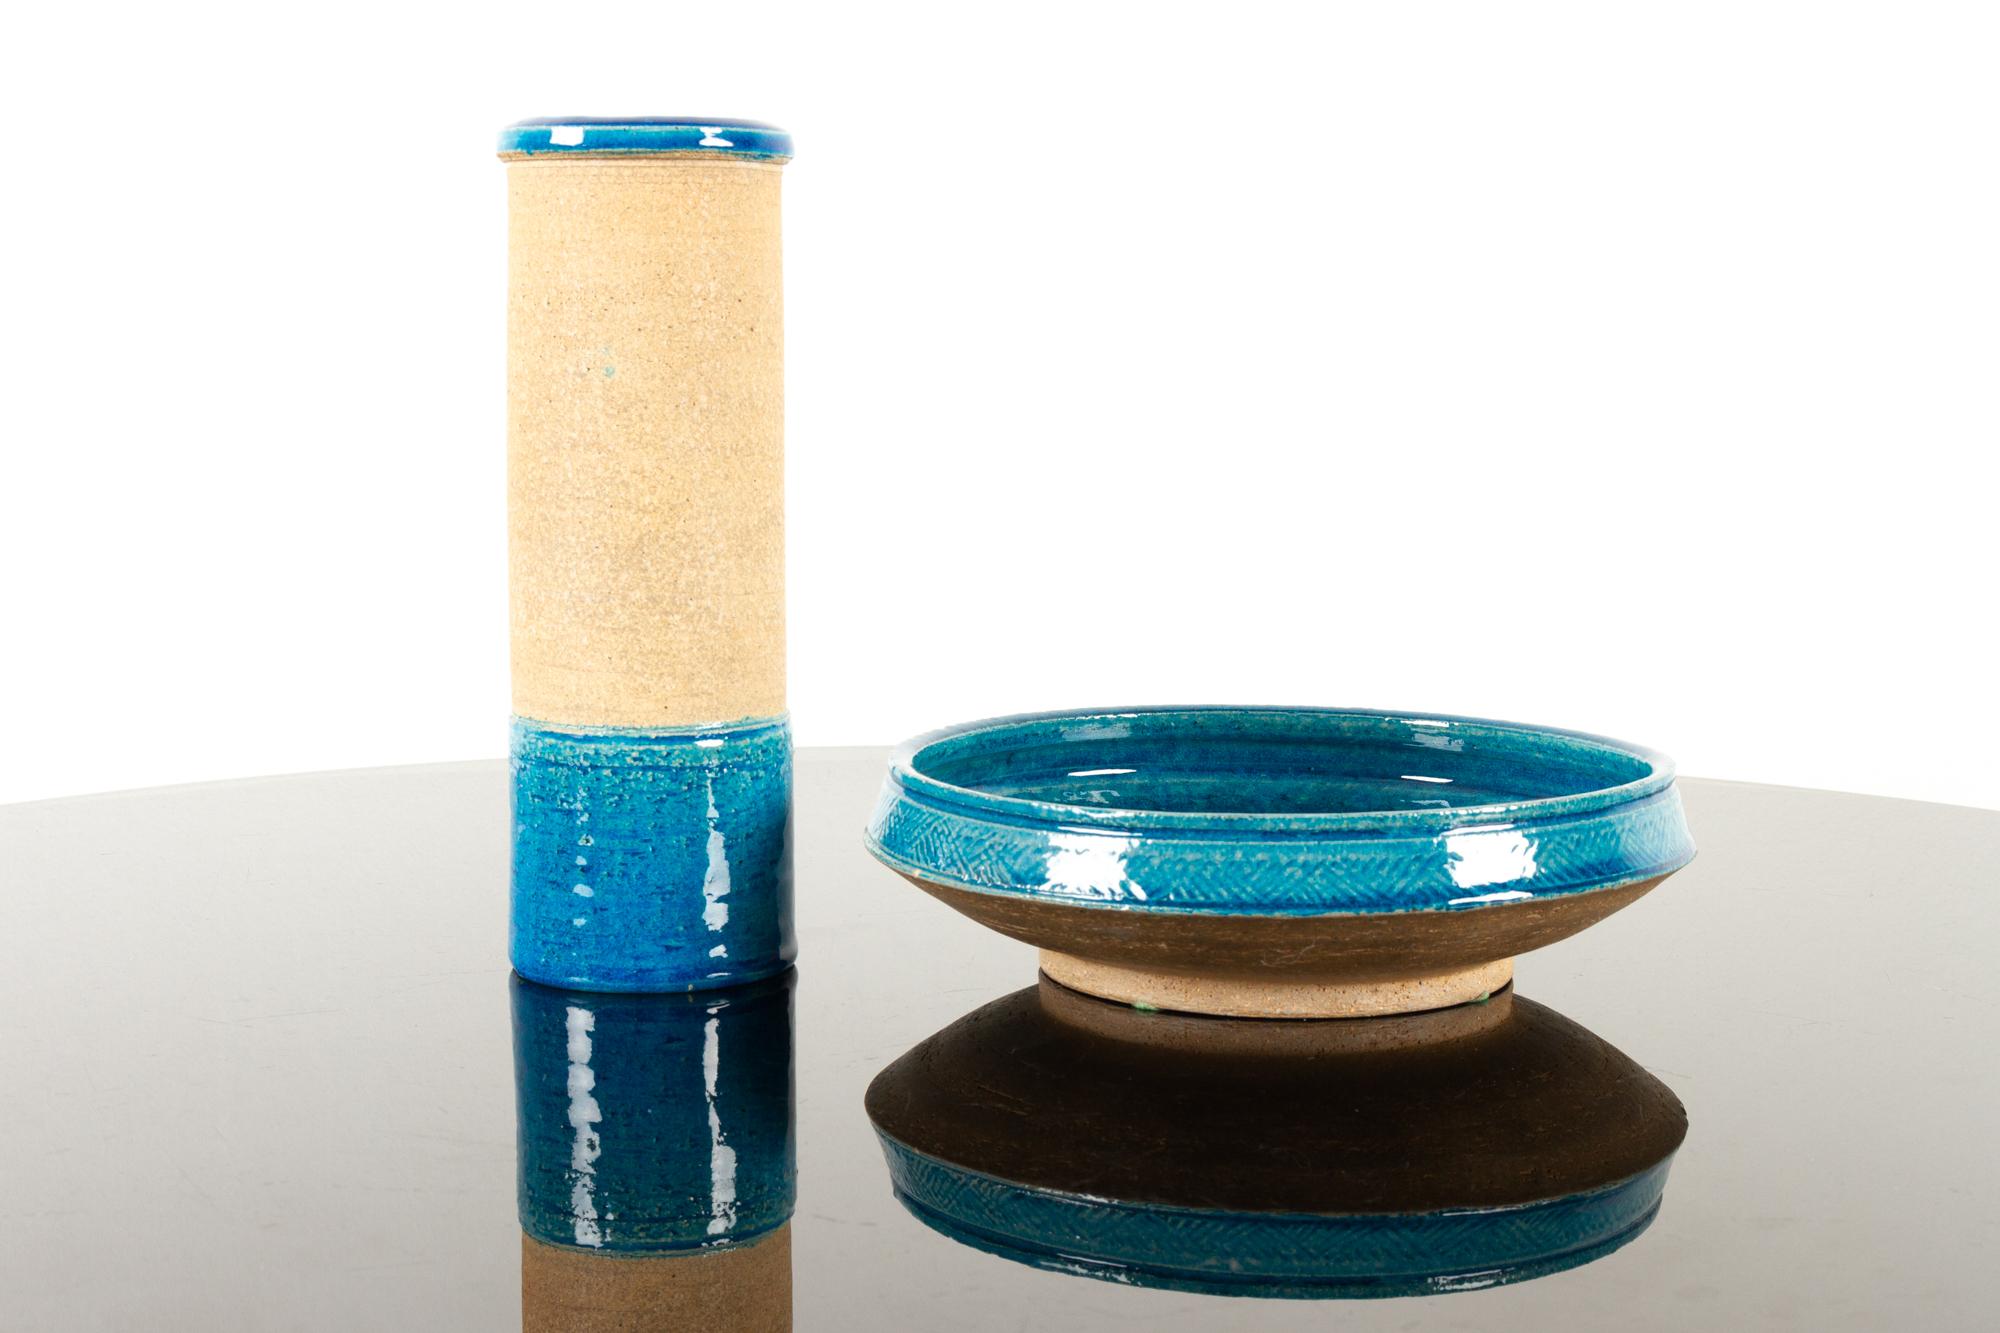 Vintage Danish ceramic bowl and vase by Nils Kähler for Kähler ceramics, 1960s.
Set of bowl and vase in azure / turquoise glaze. Signed by Nils Kähler and stamped with HAK and made in Denmark.
Measures: Bowl diameter 22 cm, height 6 cm
Vase